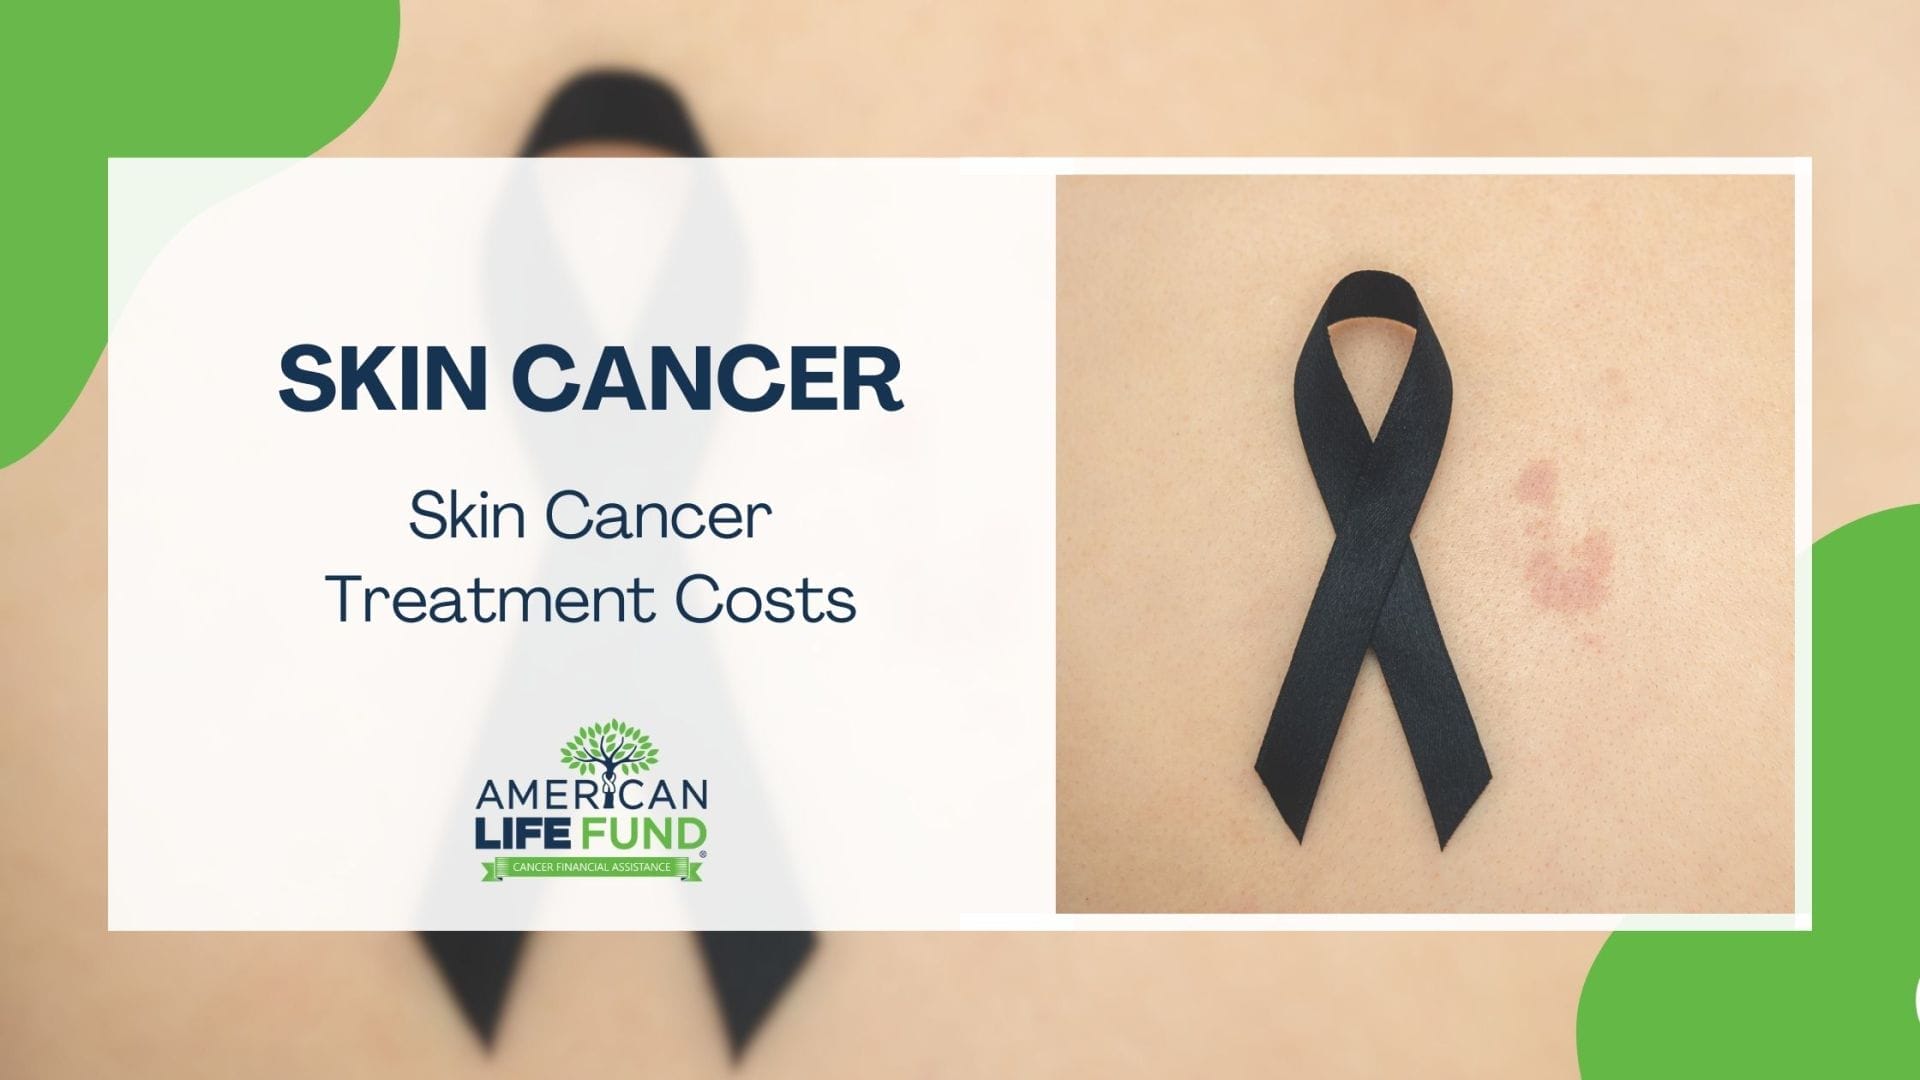  An informative graphic for a blog post highlighting 'Skin Cancer Treatment Costs,' featuring a black awareness ribbon on the right side with a background image of skin showing a possible cancerous lesion. The left side has a green logo for the American Life Fund with text promoting cancer financial assistance.